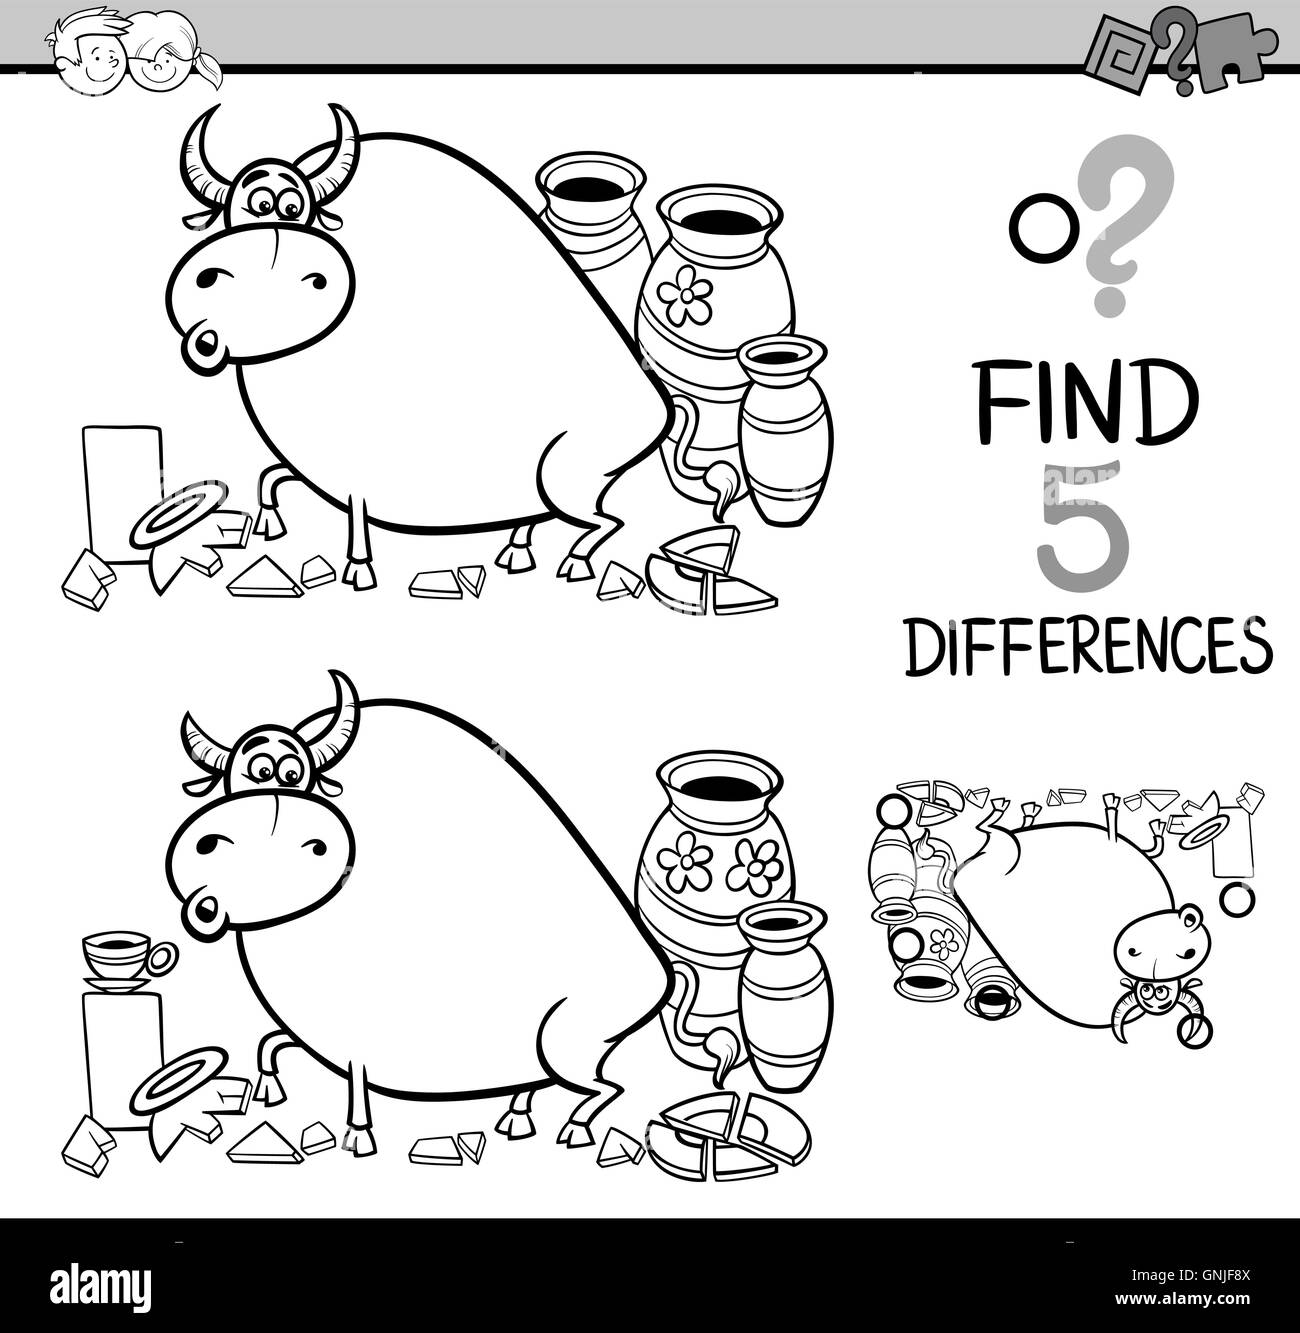 differences activity coloring book Stock Vector